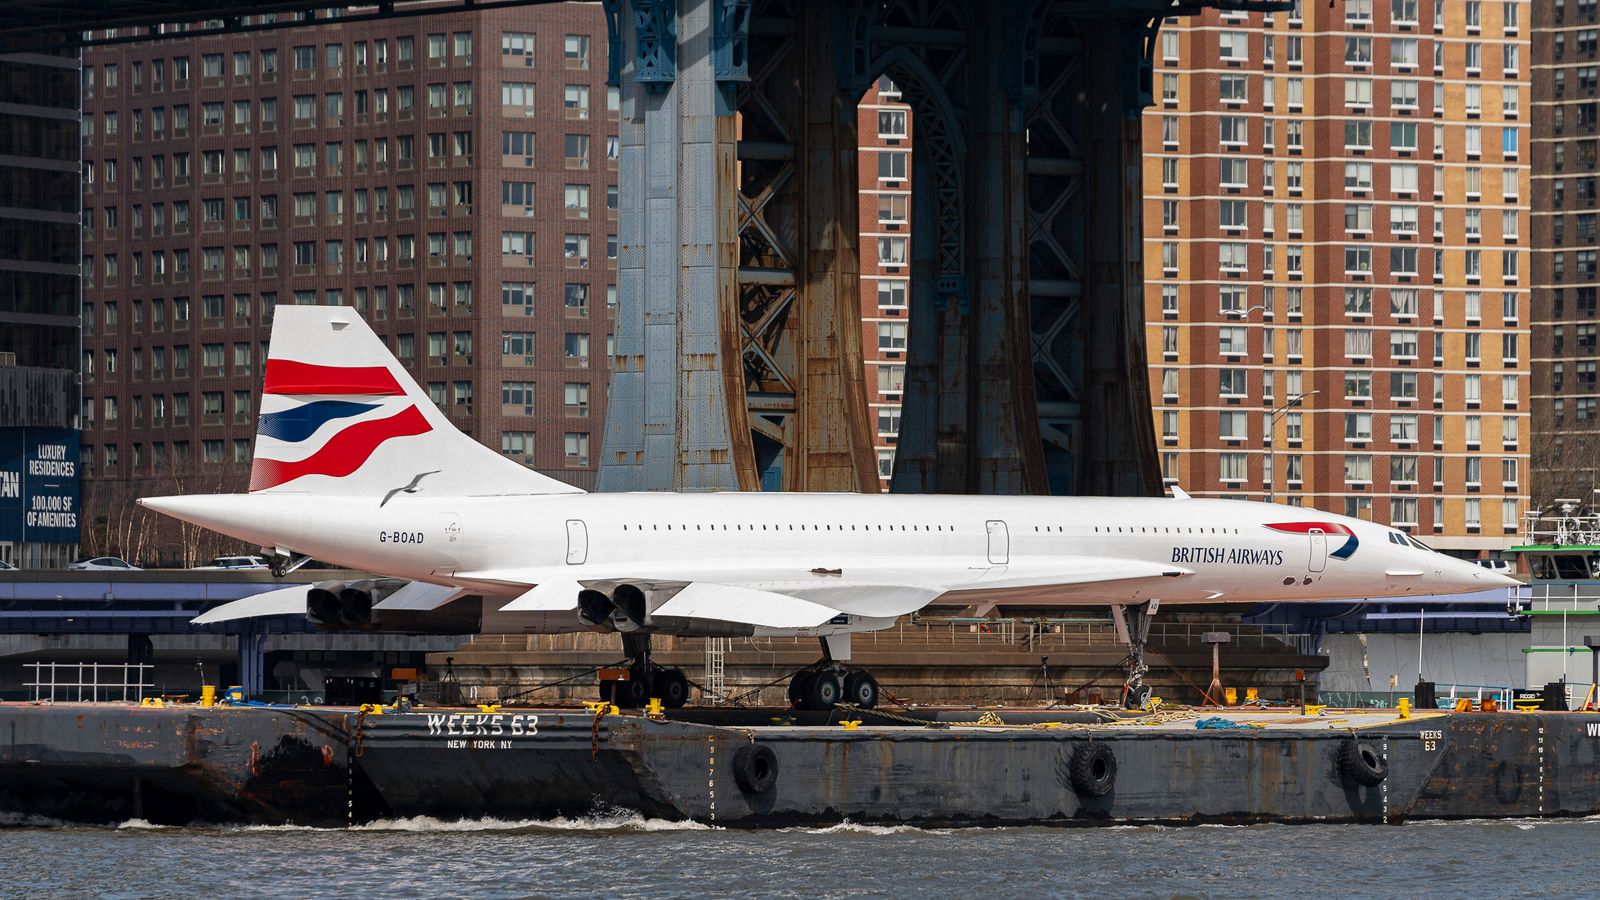 Concorde supersonic jet sets sail down New York river after months of repairs